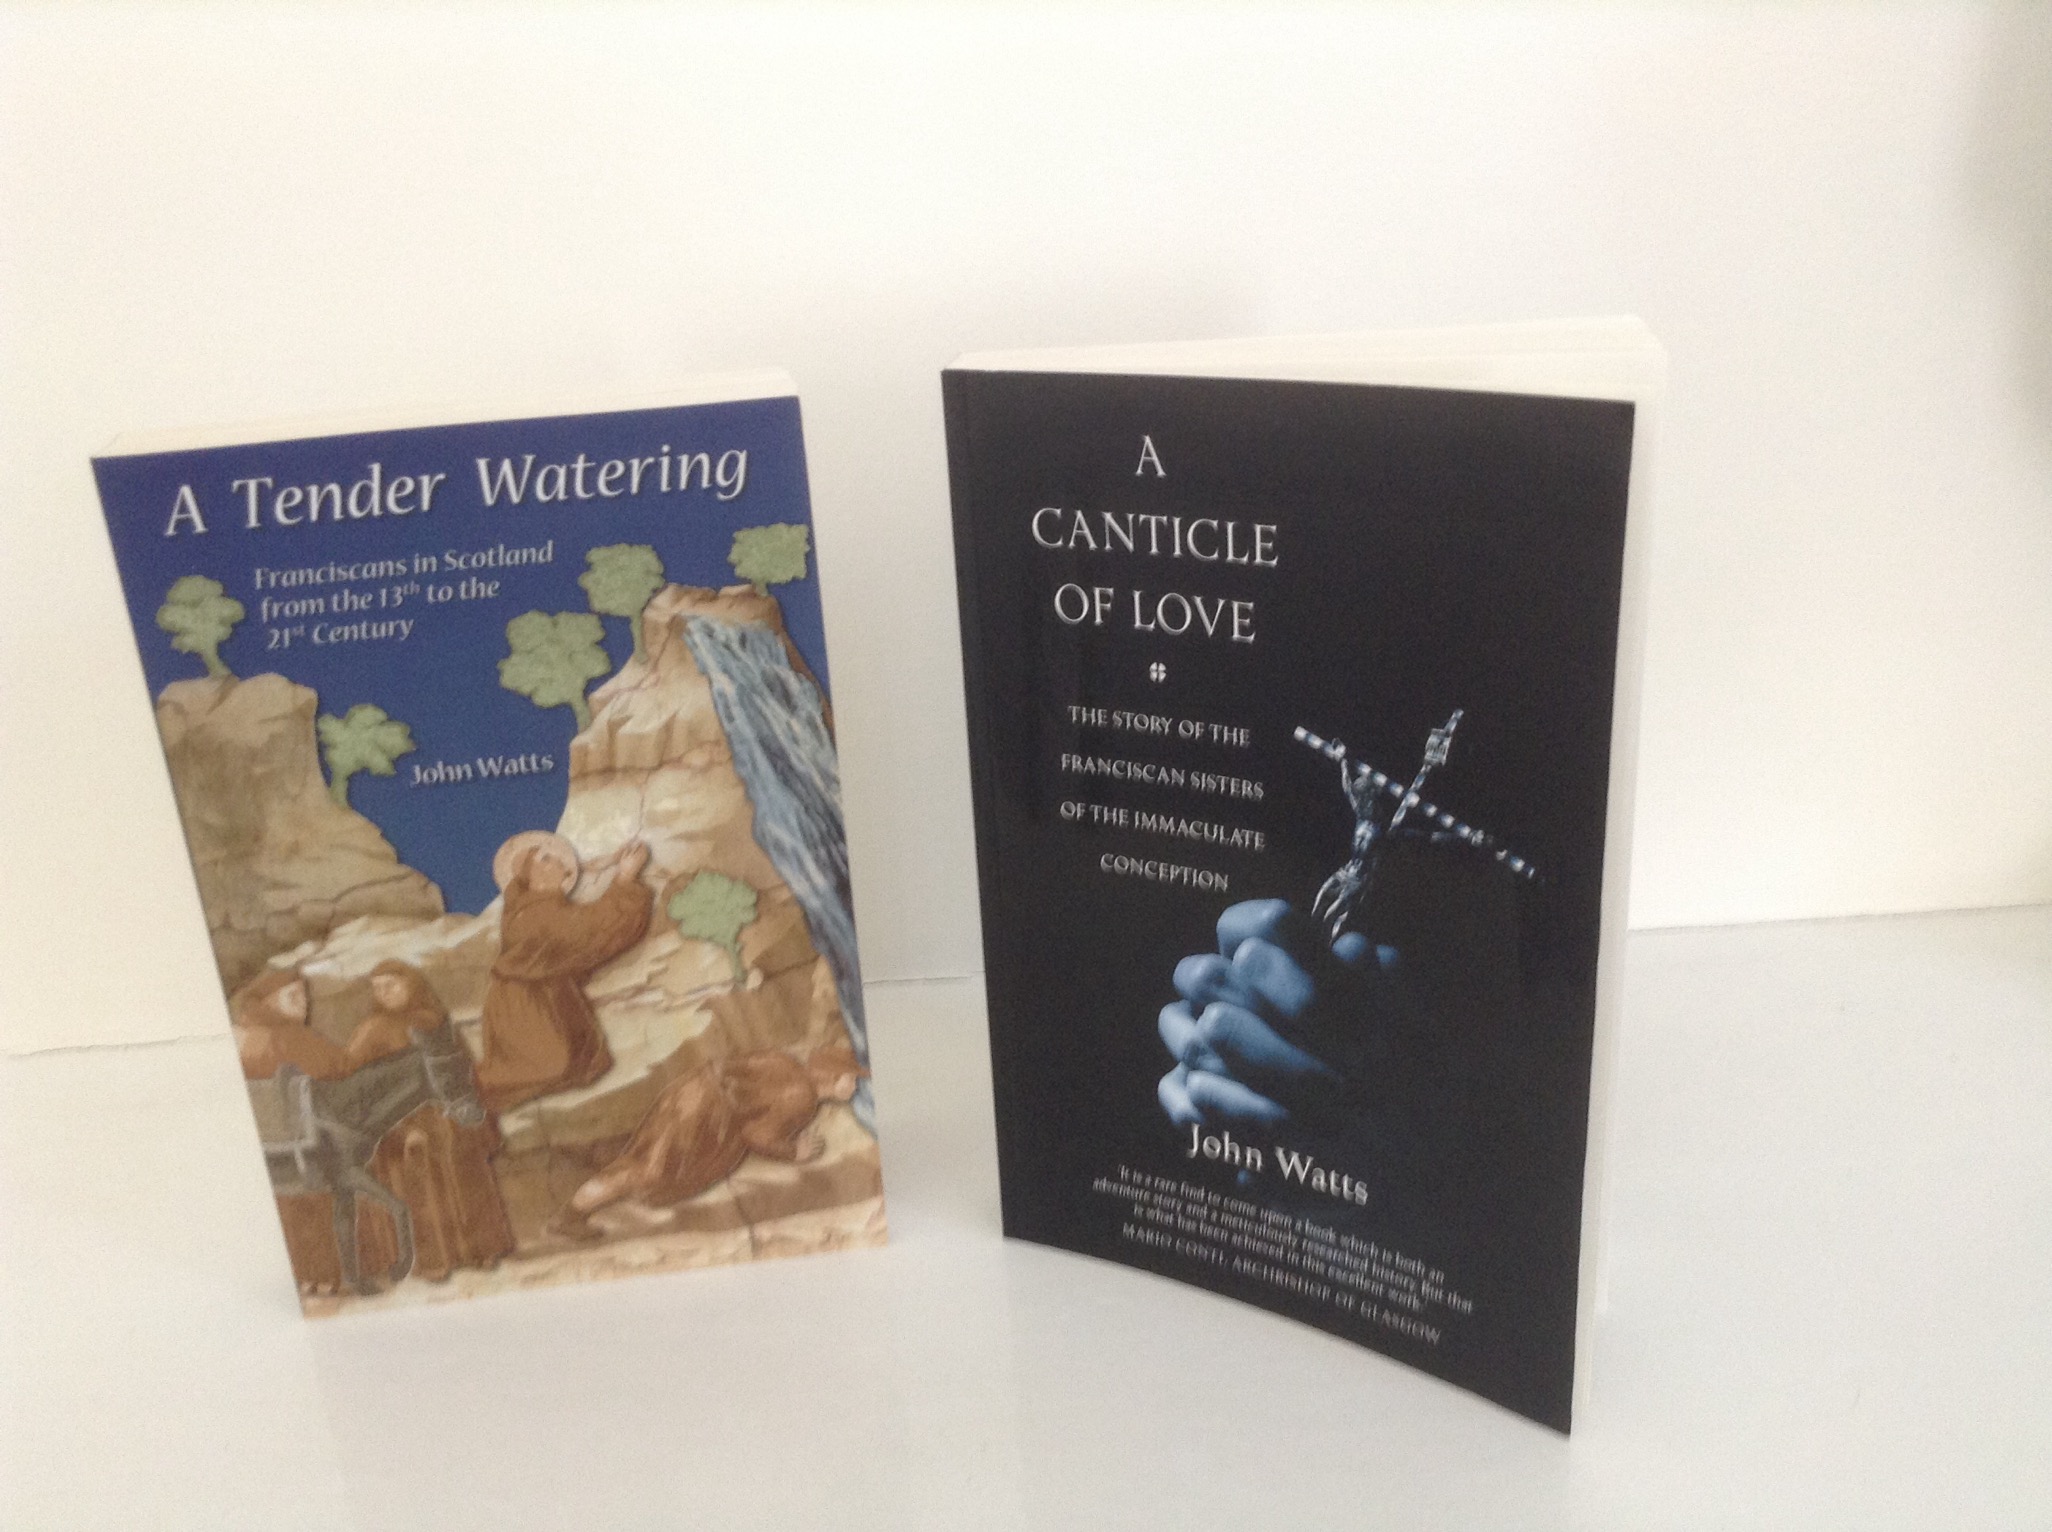 Two book covers: A Tender Watering (Franciscans in Scotland from the 13th to the 21st Century) & A Canticle of Love (The story of the Franciscan sisters of the immaculate conception), both by John Watts